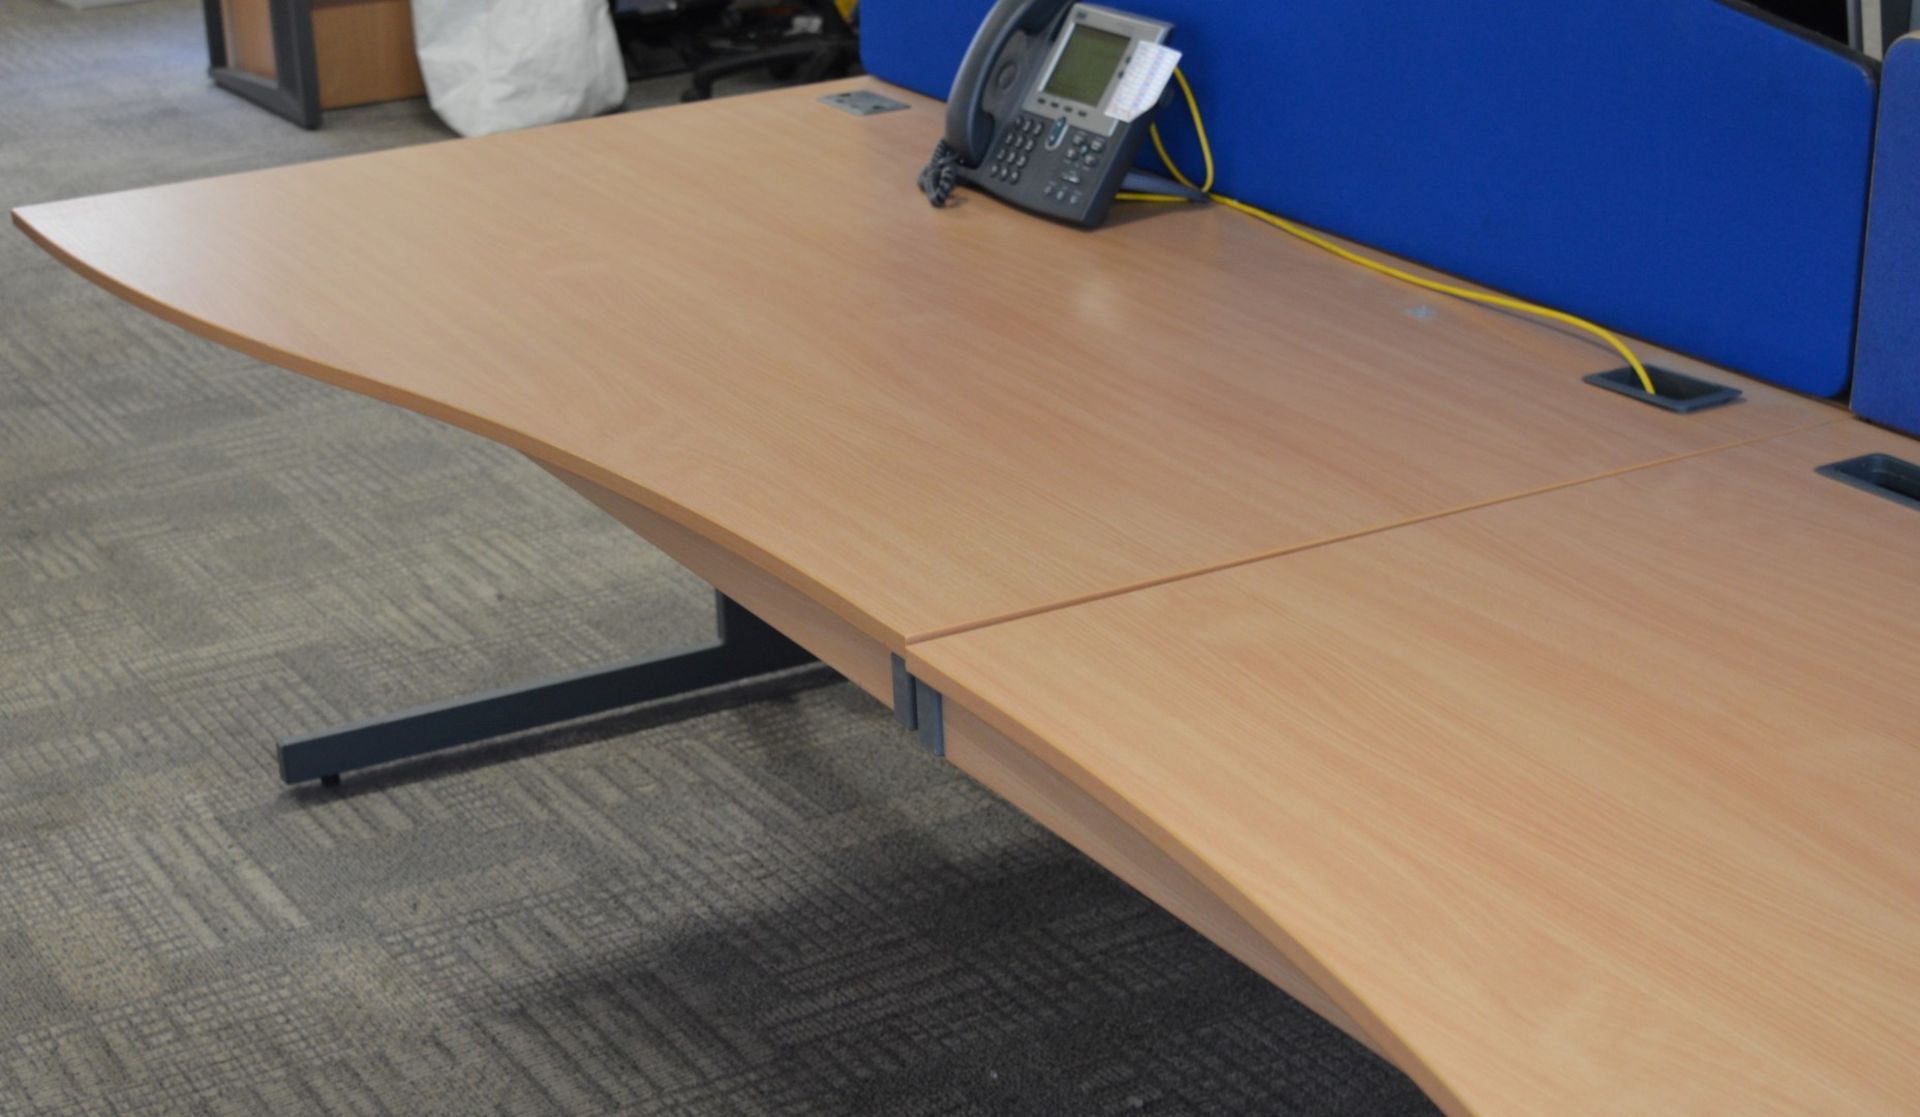 6 x Imperial Office Desks With Partition Dividers - Includes 3 Left Hand & 3 Right Hand Desks - - Image 7 of 8